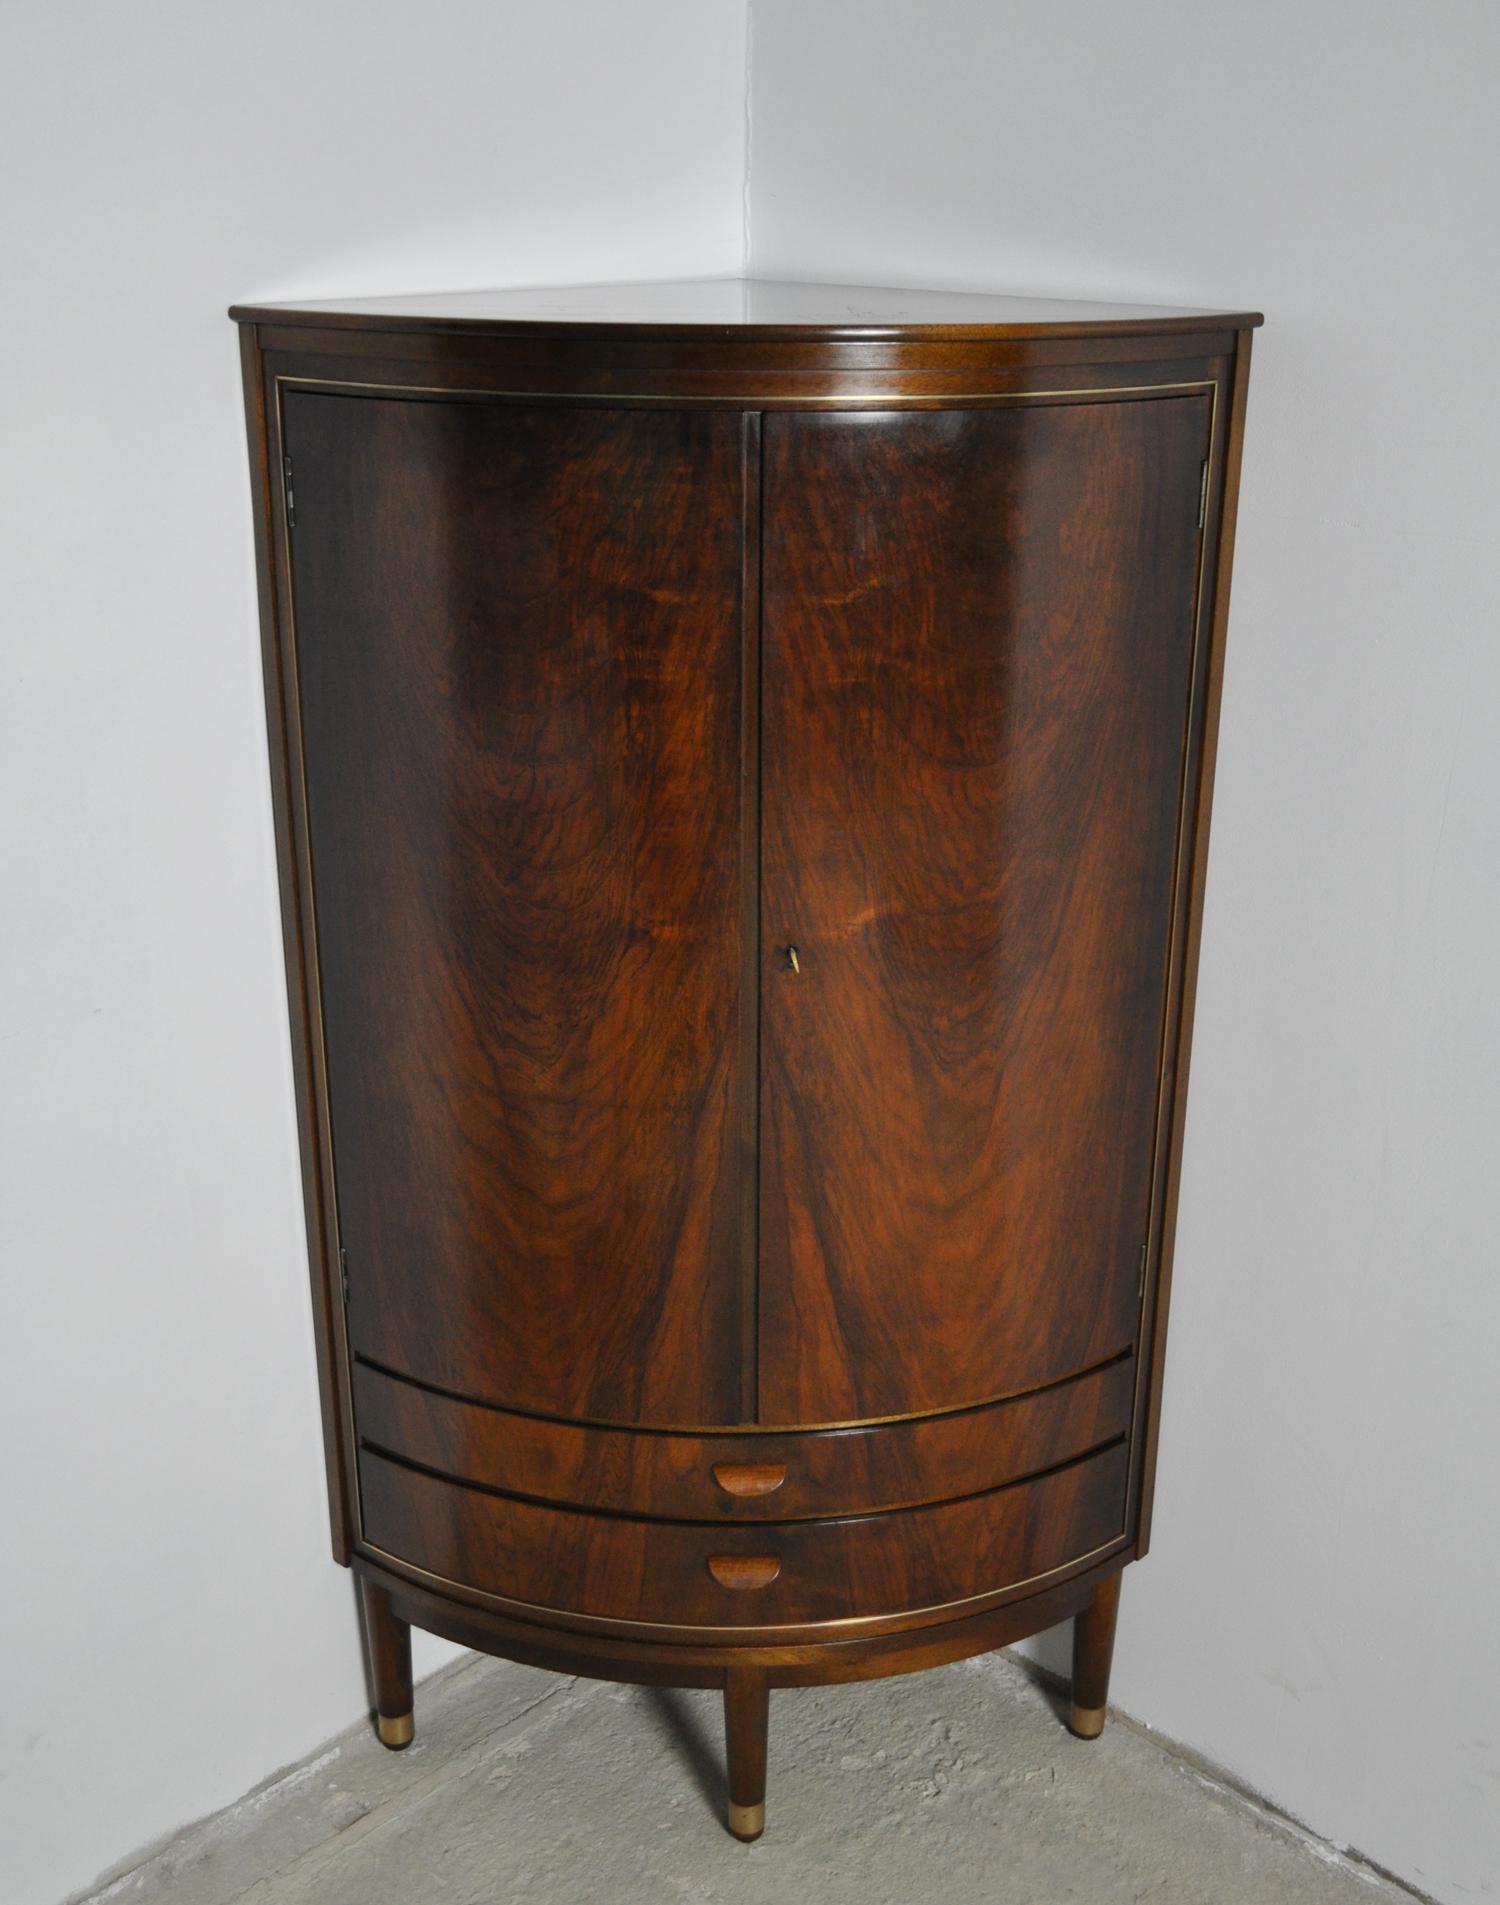 Corner Cupboard attributed to Agner Christoffersen. Made of veneered mahogany, front with two doors and 4 shelves behind. Underneath two drawers with beautifully curved handles. Brass inlays and feet.

Fine vintage condition, signs of wear